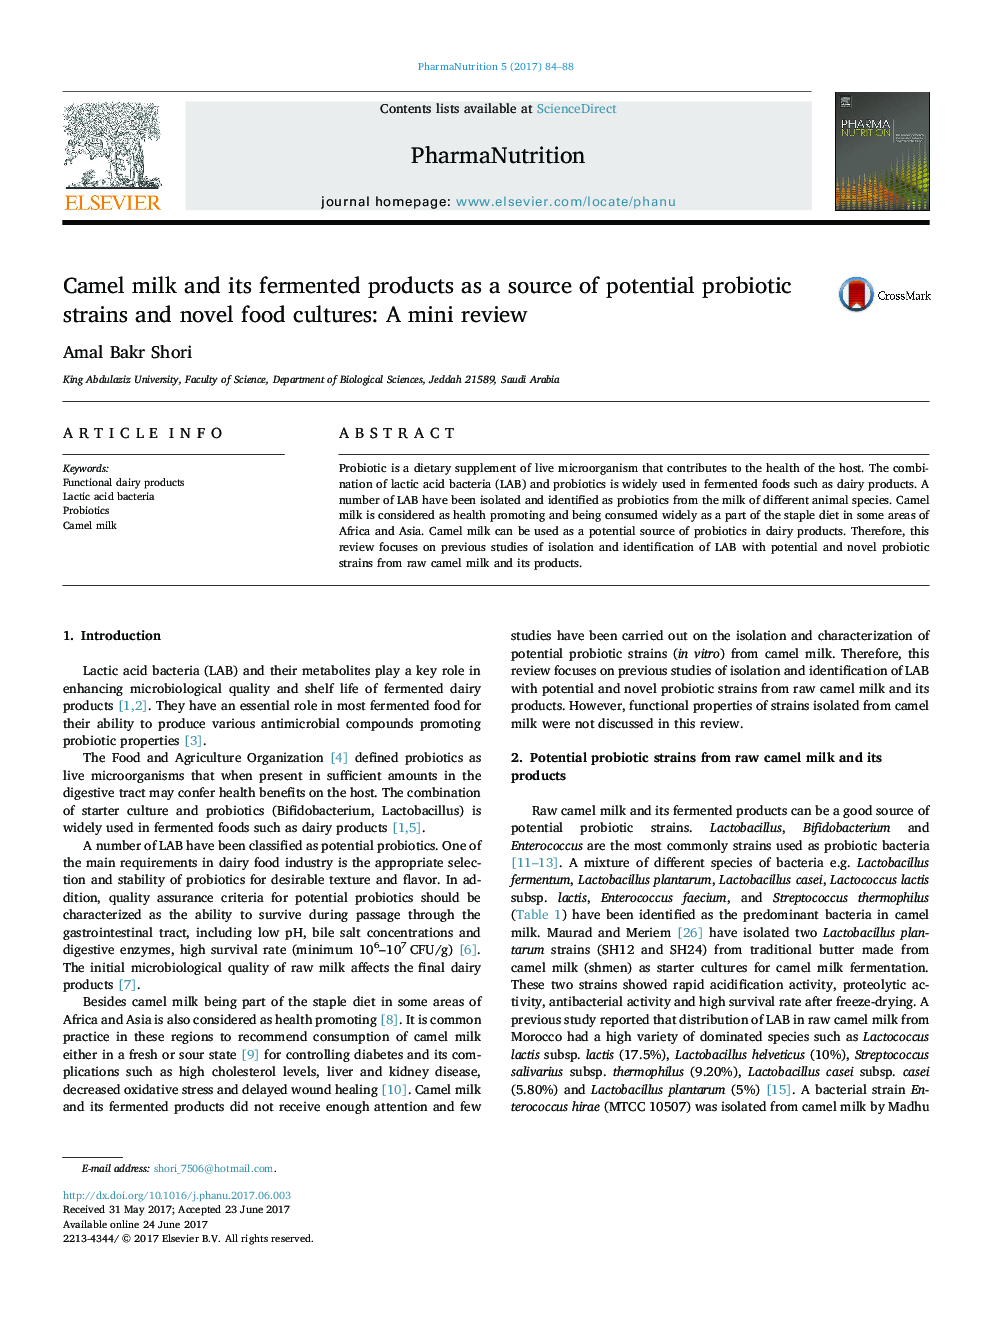 Camel milk and its fermented products as a source of potential probiotic strains and novel food cultures: A mini review